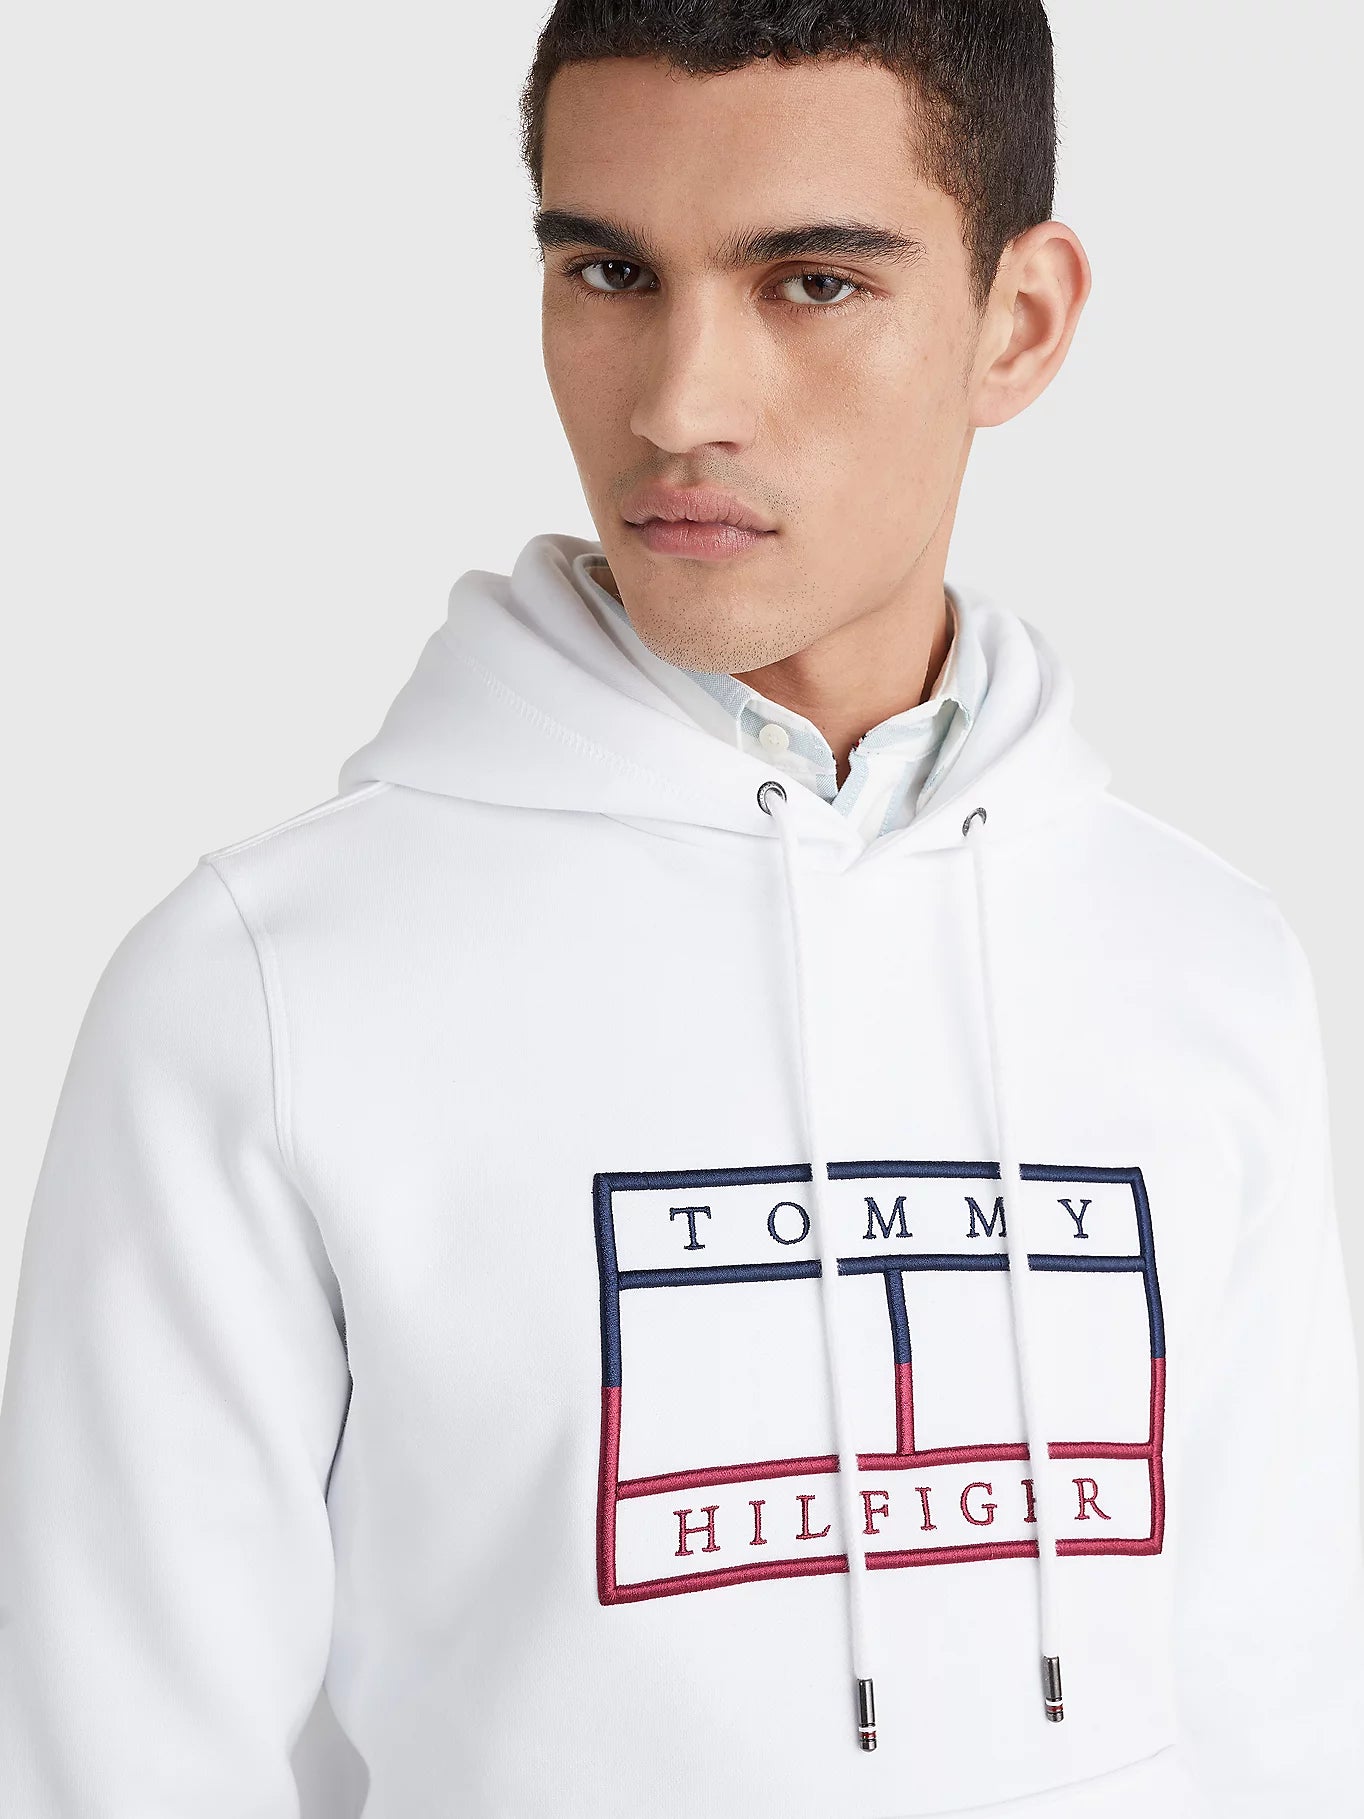 Sweat Capuche Tommy Hilfiger Grande Taille homme grande taille